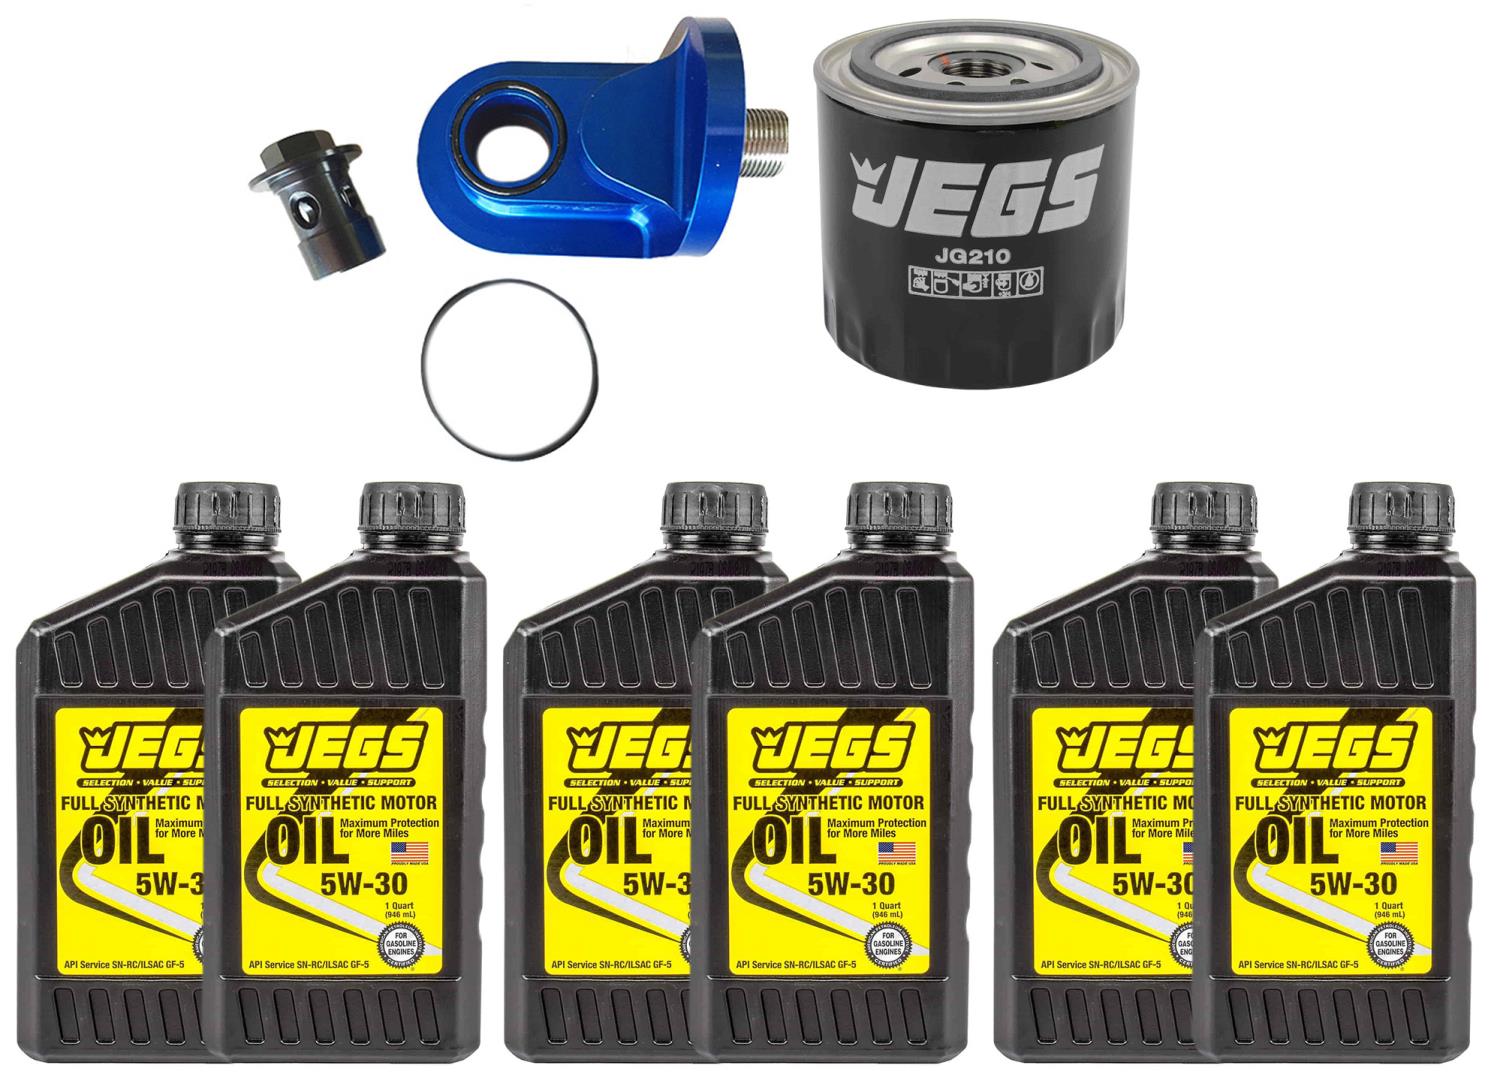 90-Degree Oil Filter Adapter, Oil Filter, and 5W30 Oil Kit for Ford Small/Big Block Pushrod V8